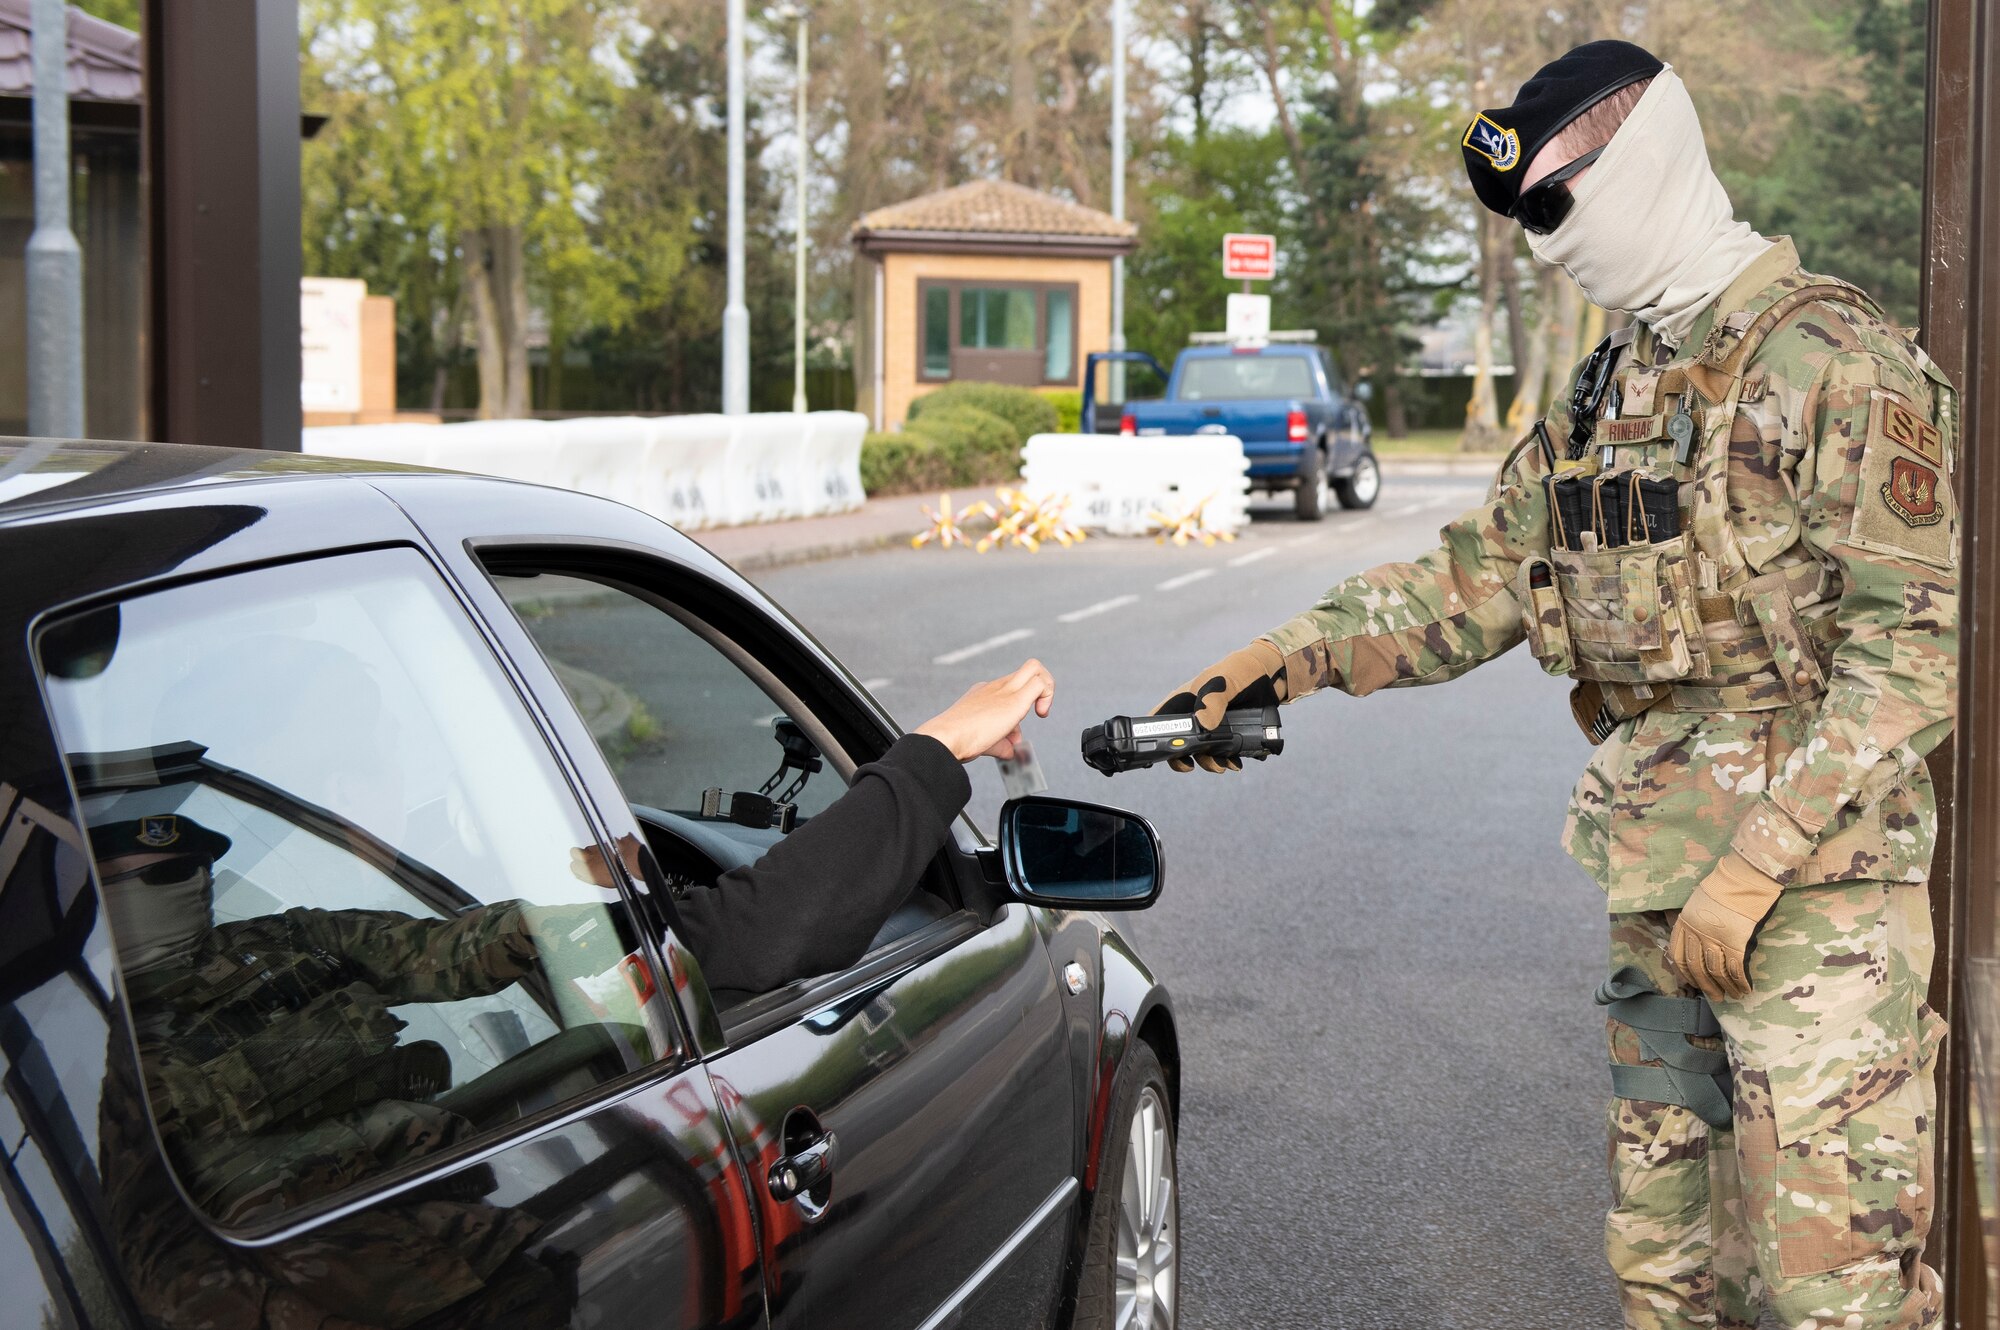 A 48th Security Forces Squadron Airman scans an ID card at the gate at Royal Air Force Lakenheath, England, April 16, 2020. The 48th SFS Defenders have taken preventative measures to combat the spread of COVID-19, such as avoiding unnecessary person-to-person contact by not handling ID cards. (U.S. Air Force photo by Airman 1st Class Jessi Monte)